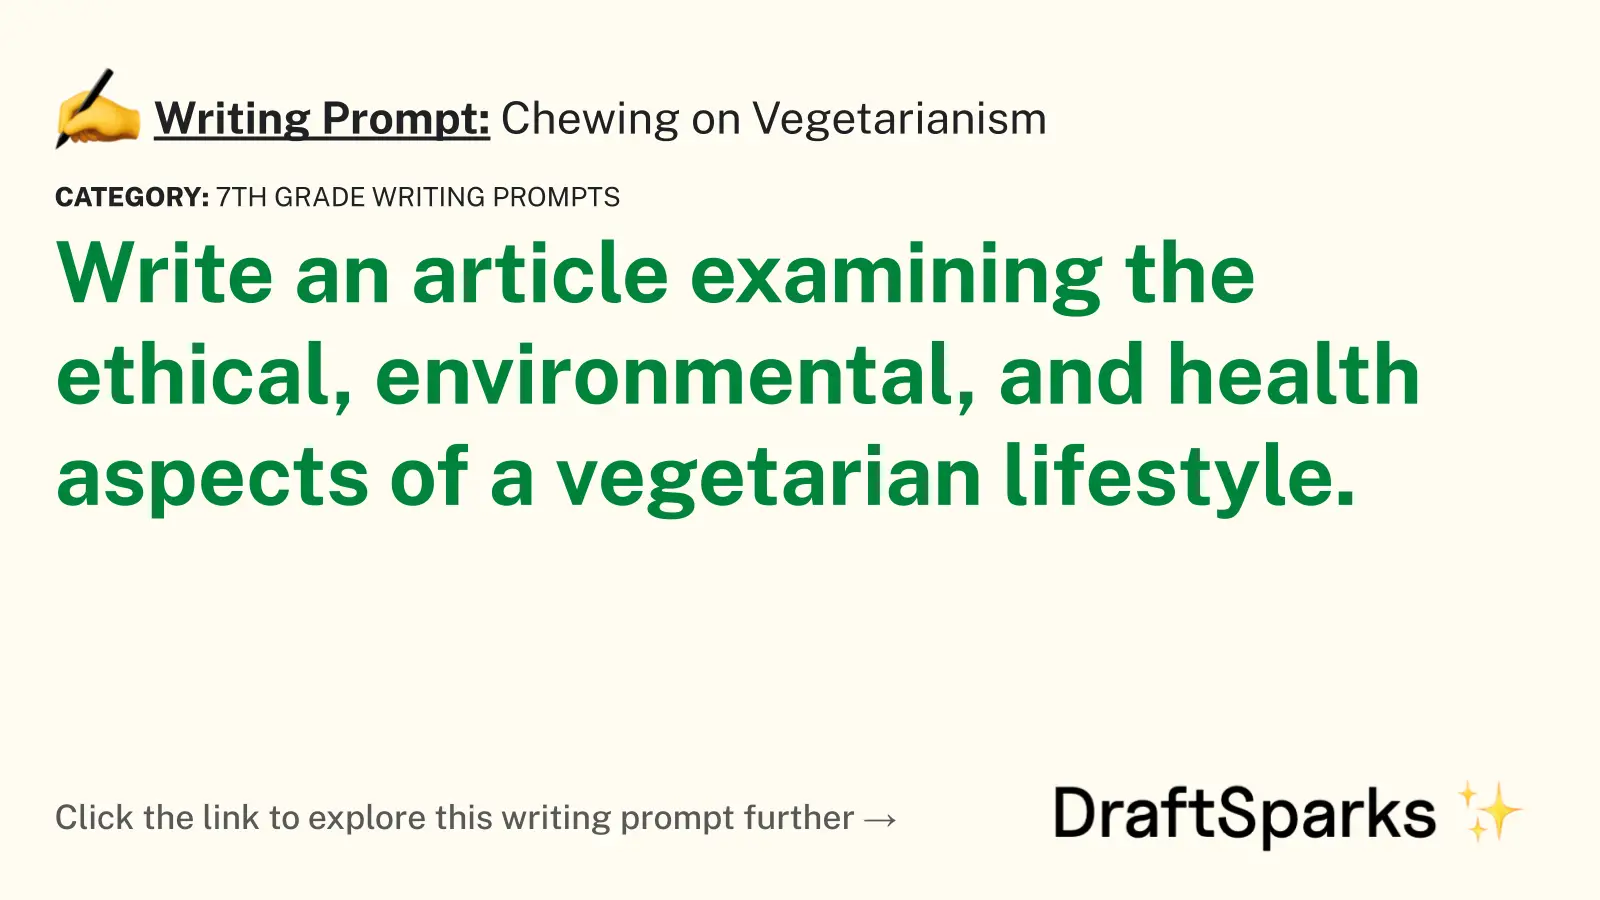 Chewing on Vegetarianism